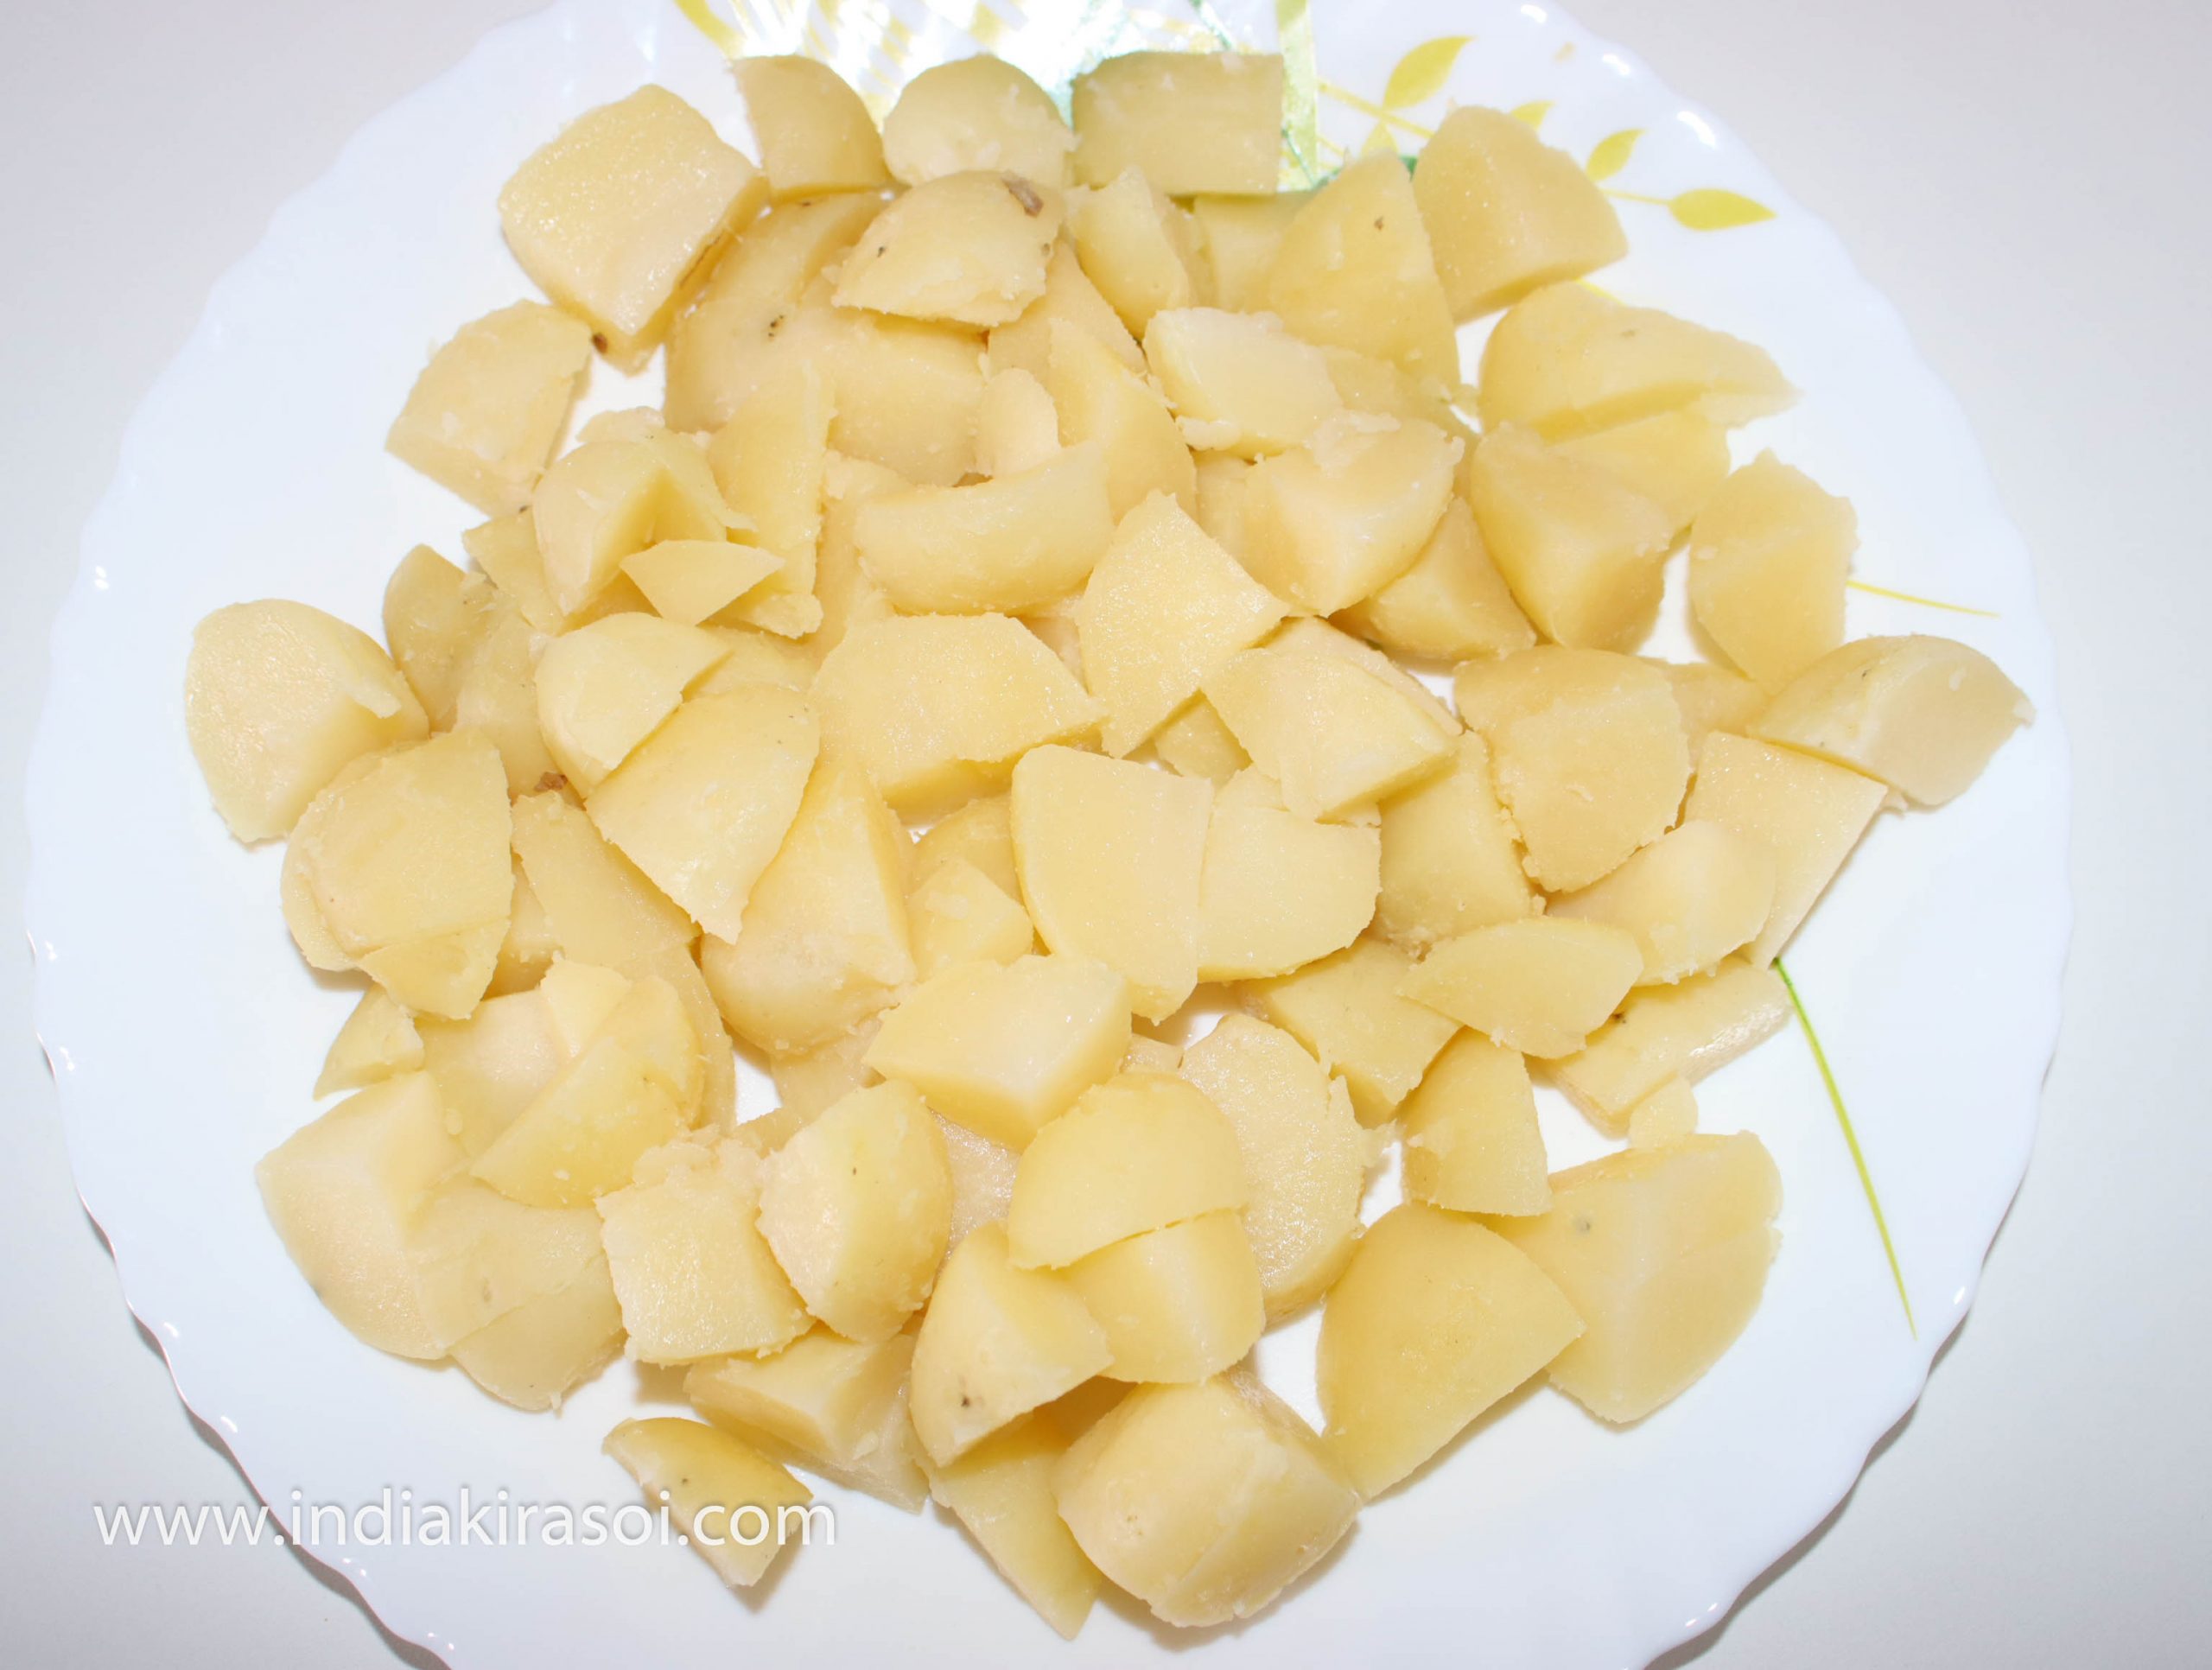 peel the potatoes and cut potatoes in small pieces.